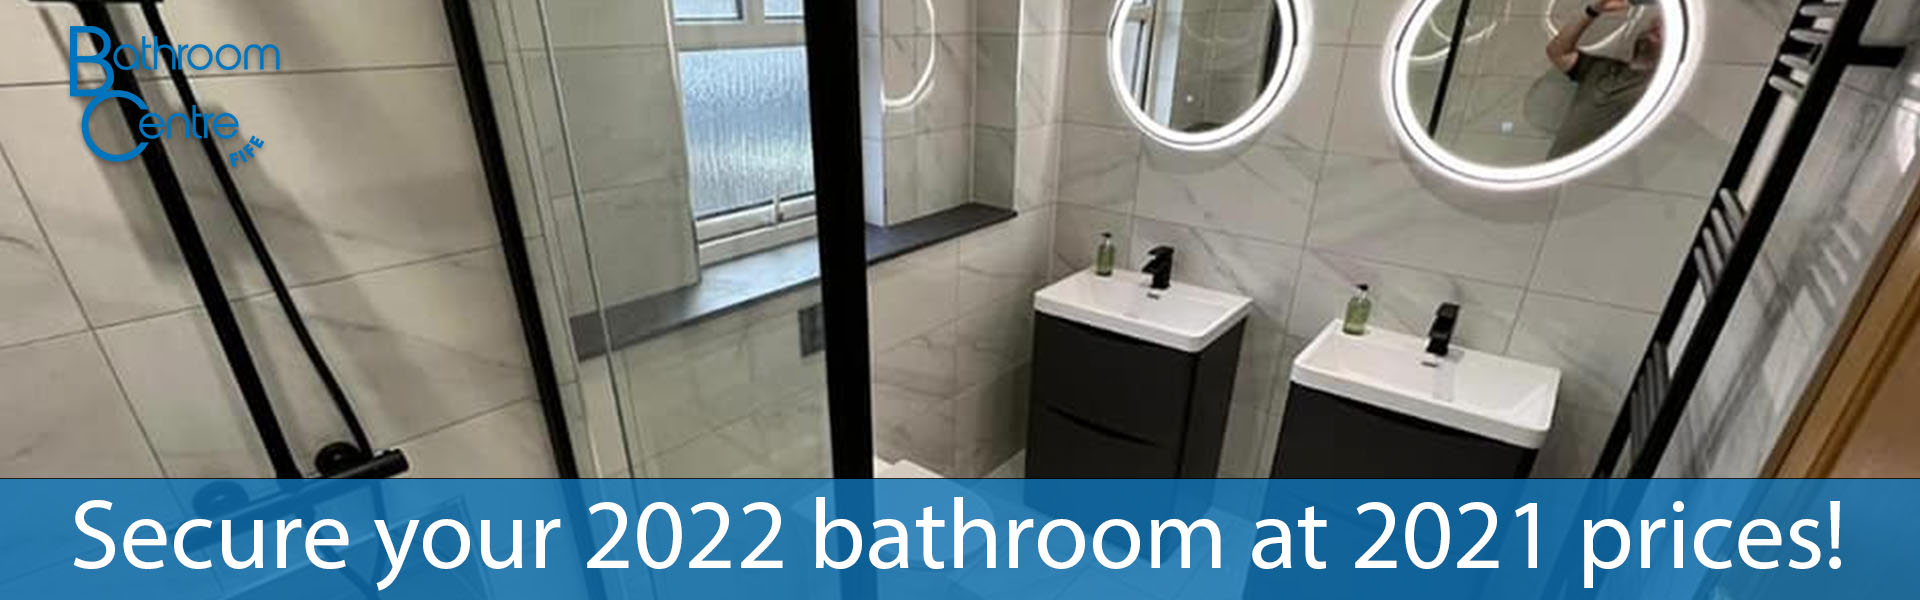 BCF-Secure-Your-Bathroom-in-2022-at-2021-prices